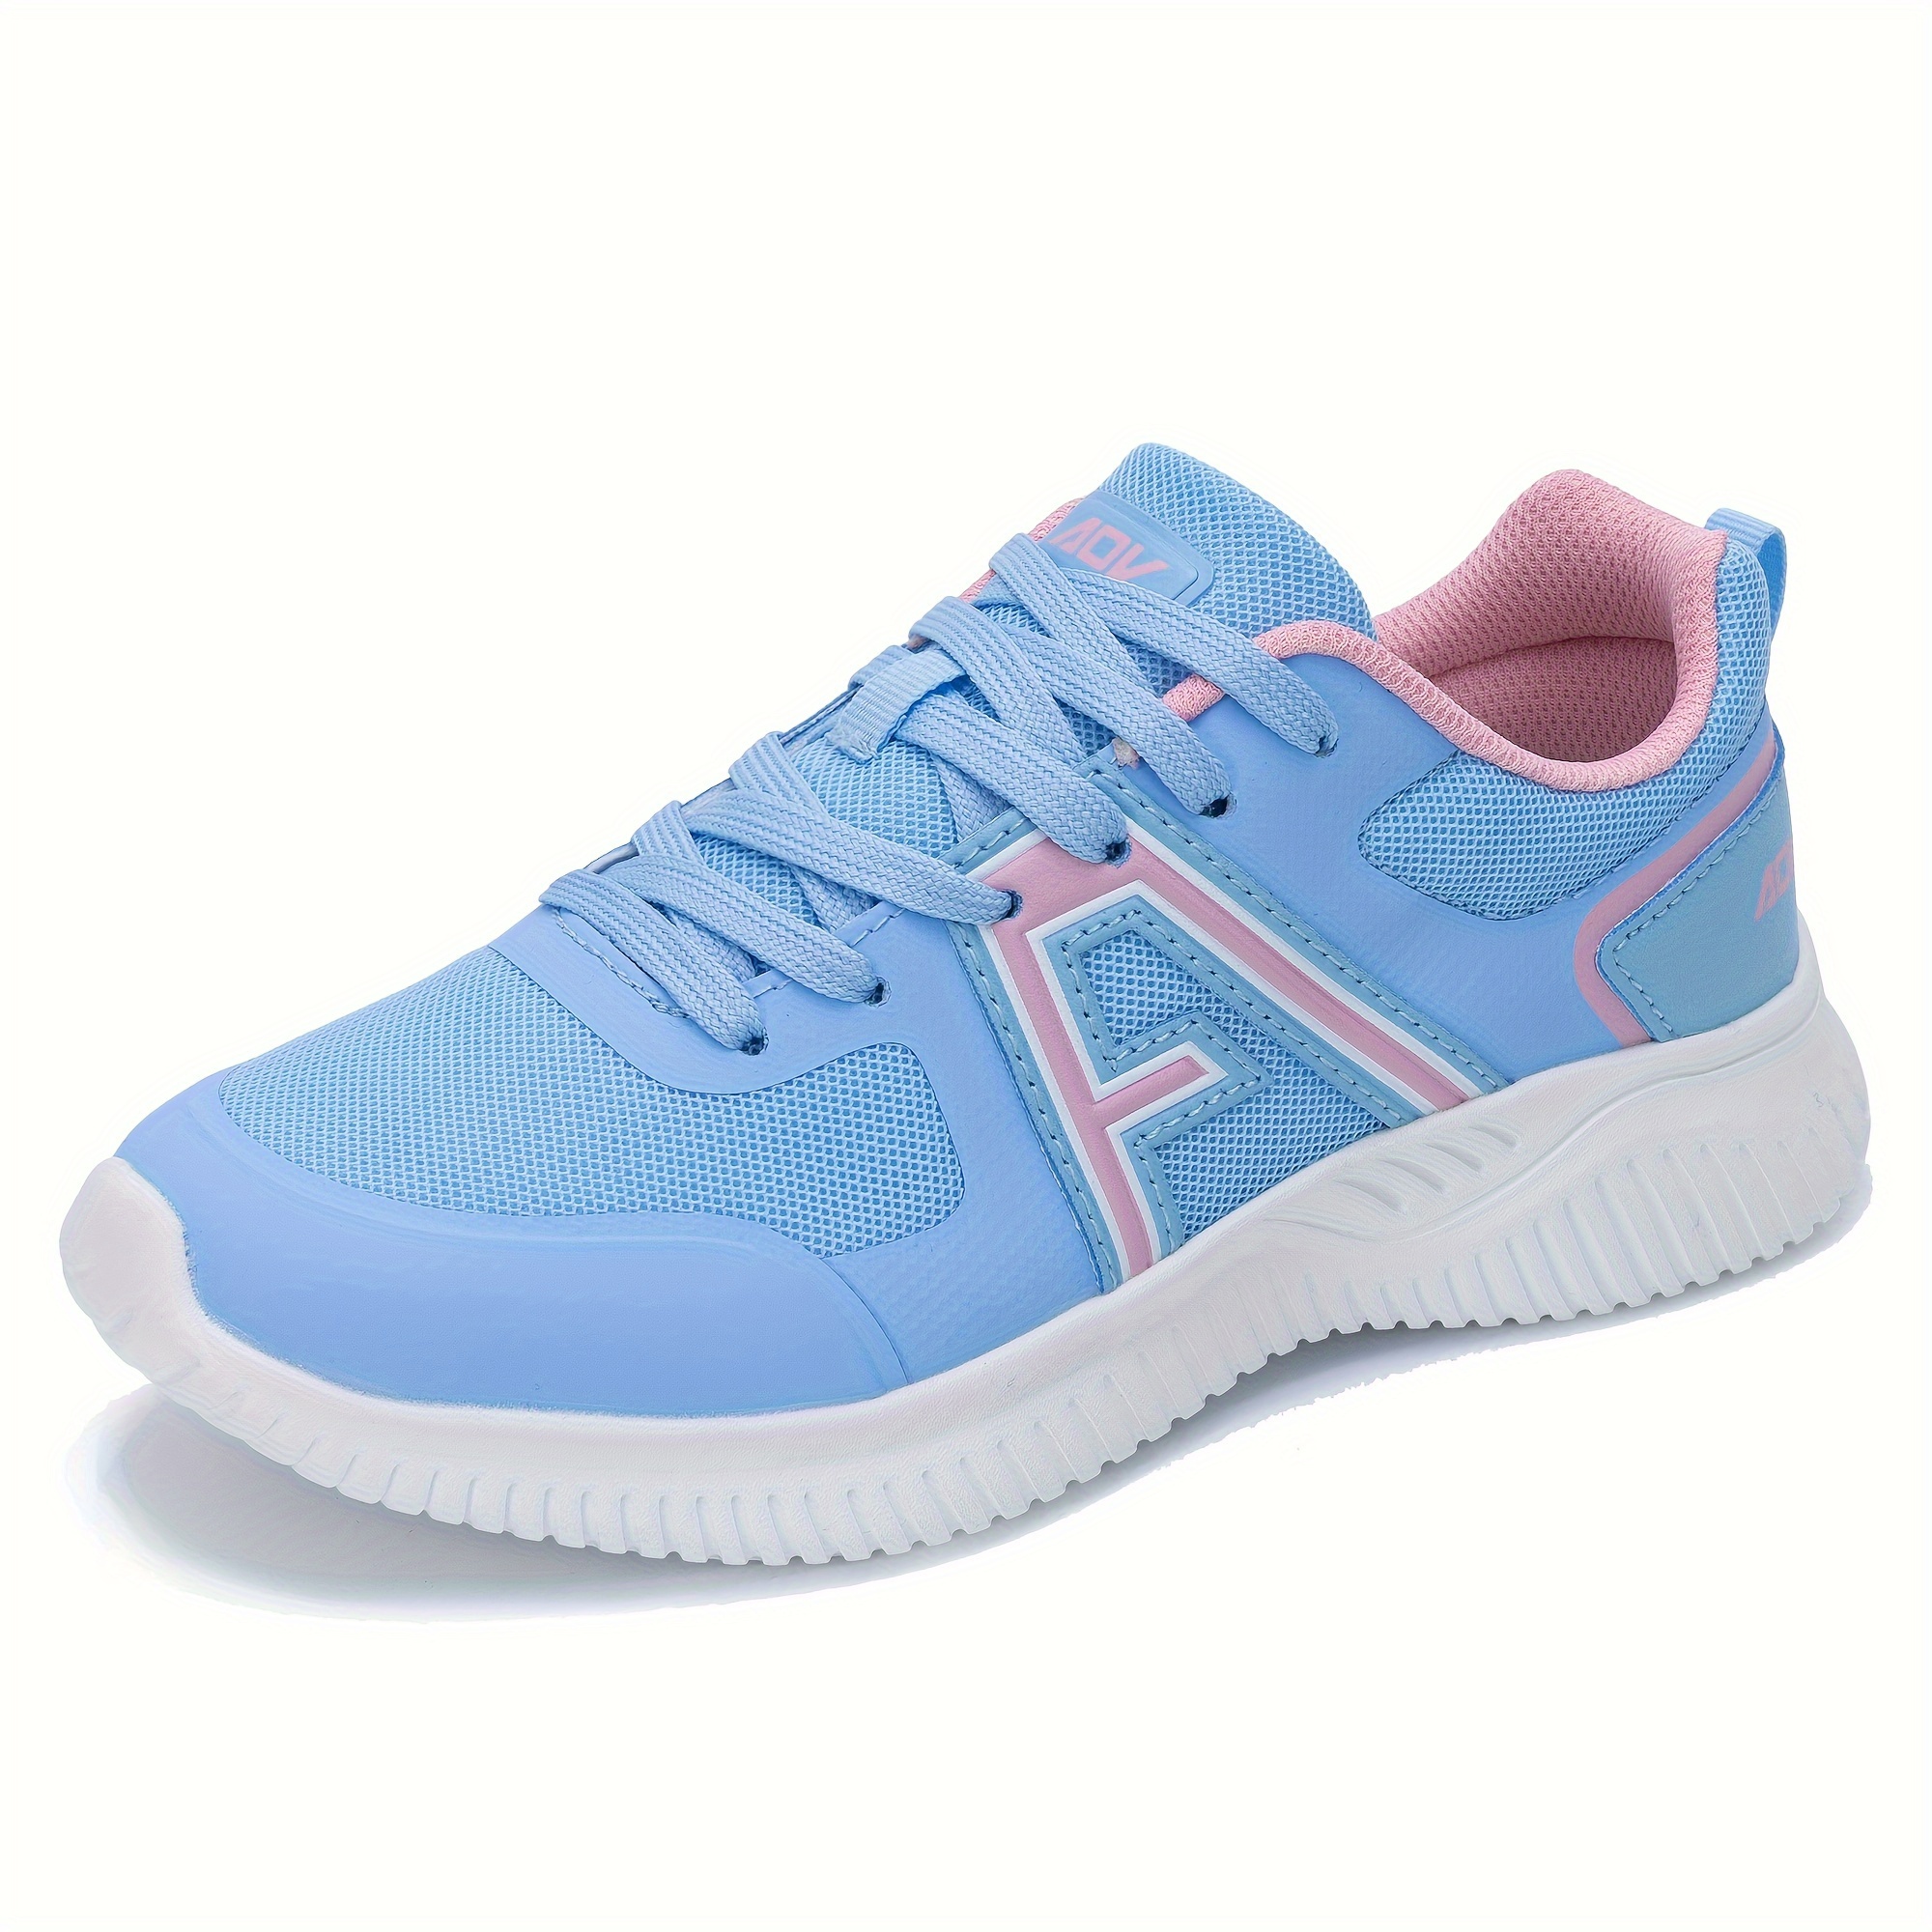 

Women's Walking Shoes With Arch Support, Lightweight Mesh Tennis Sneakers, Breathable Athletic Sports Trainers